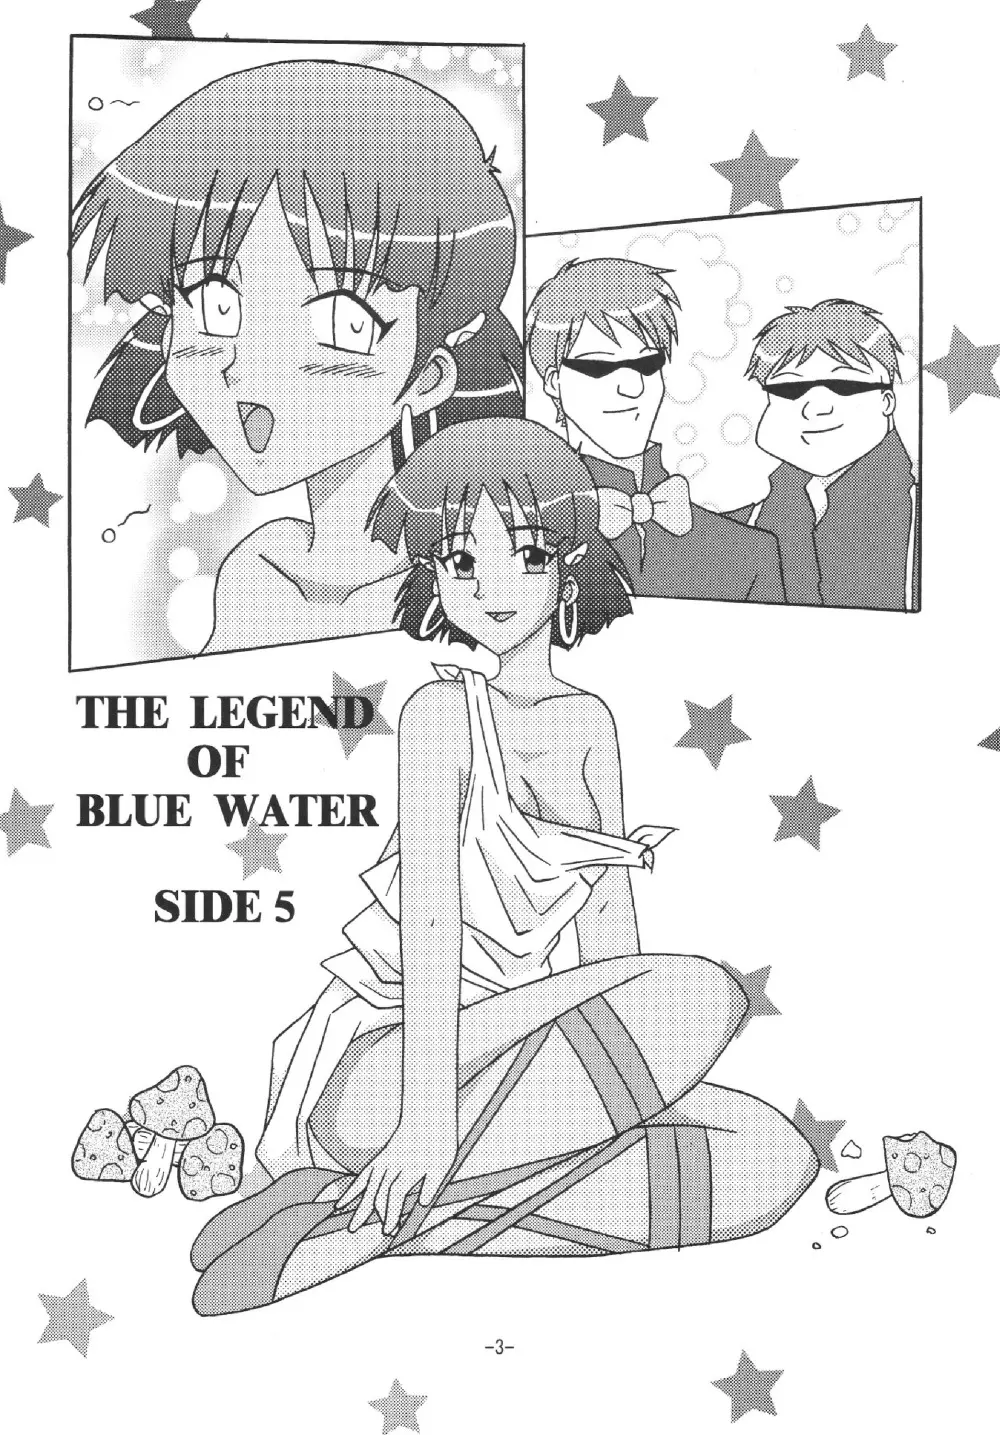 THE LEGEND OF BLUE WATER SIDE 5 2ページ